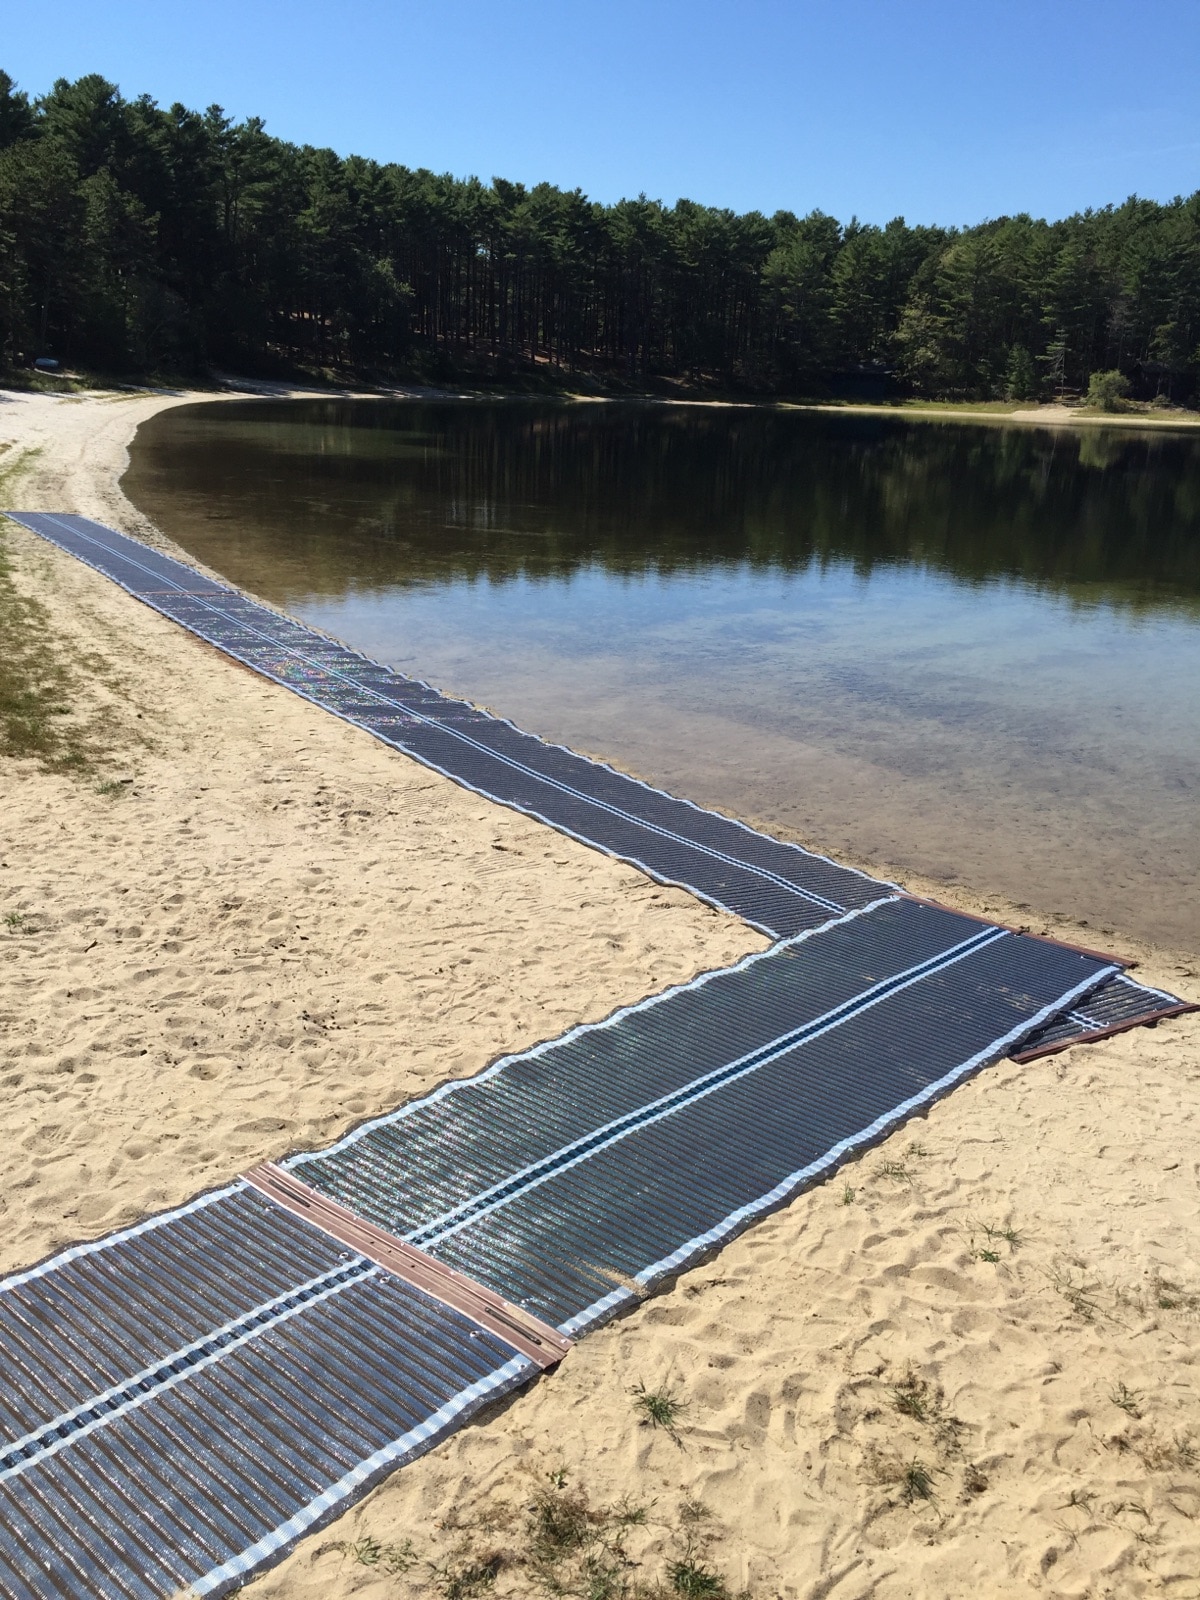 Beach mat runs up to the beach and along the water's edge at a pond surrounded by trees.